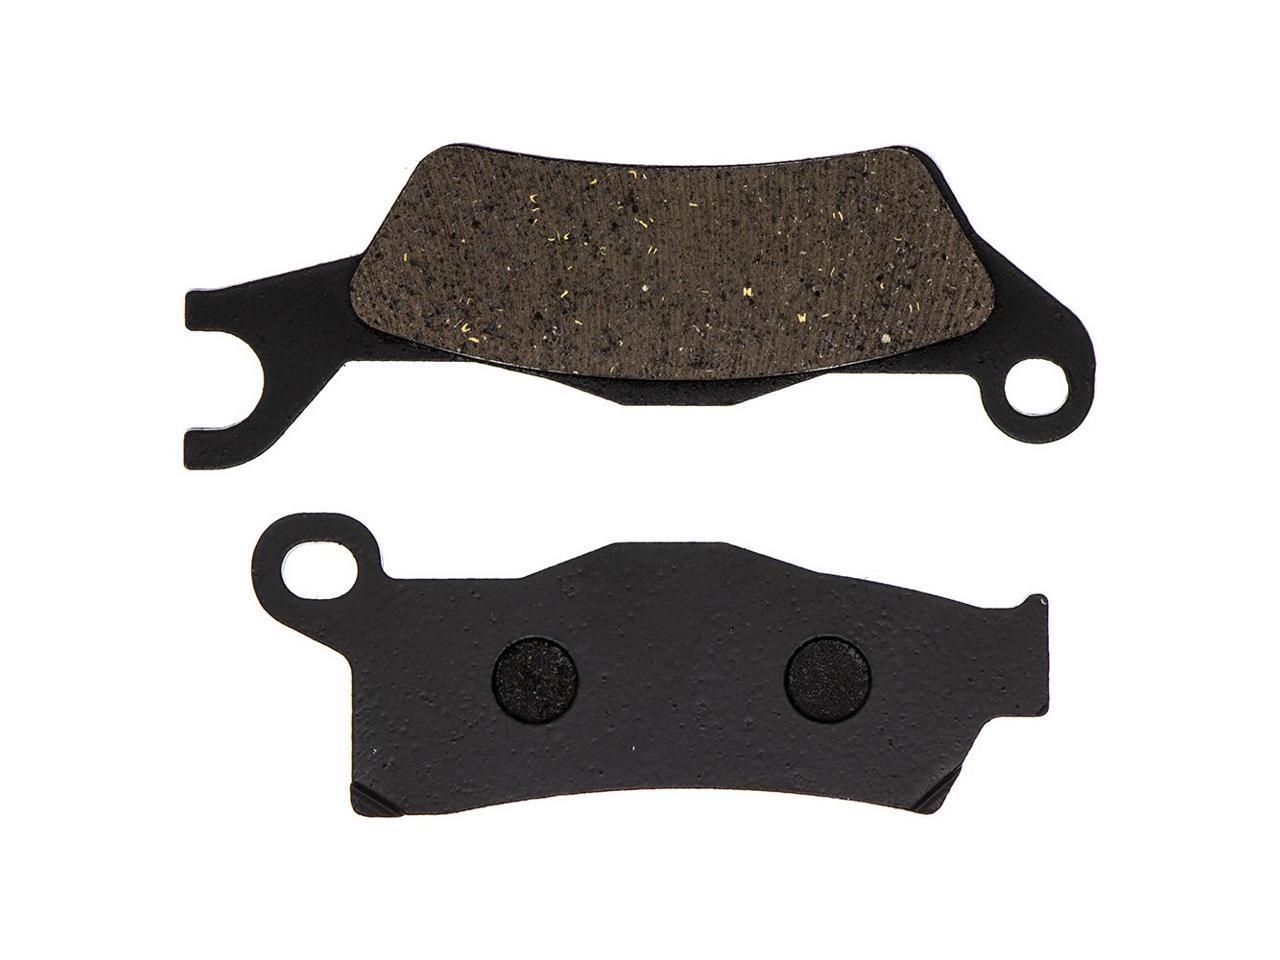 NICHE Brake Pad Kit for Can-Am Renegade Outlander L Max Complete Organic